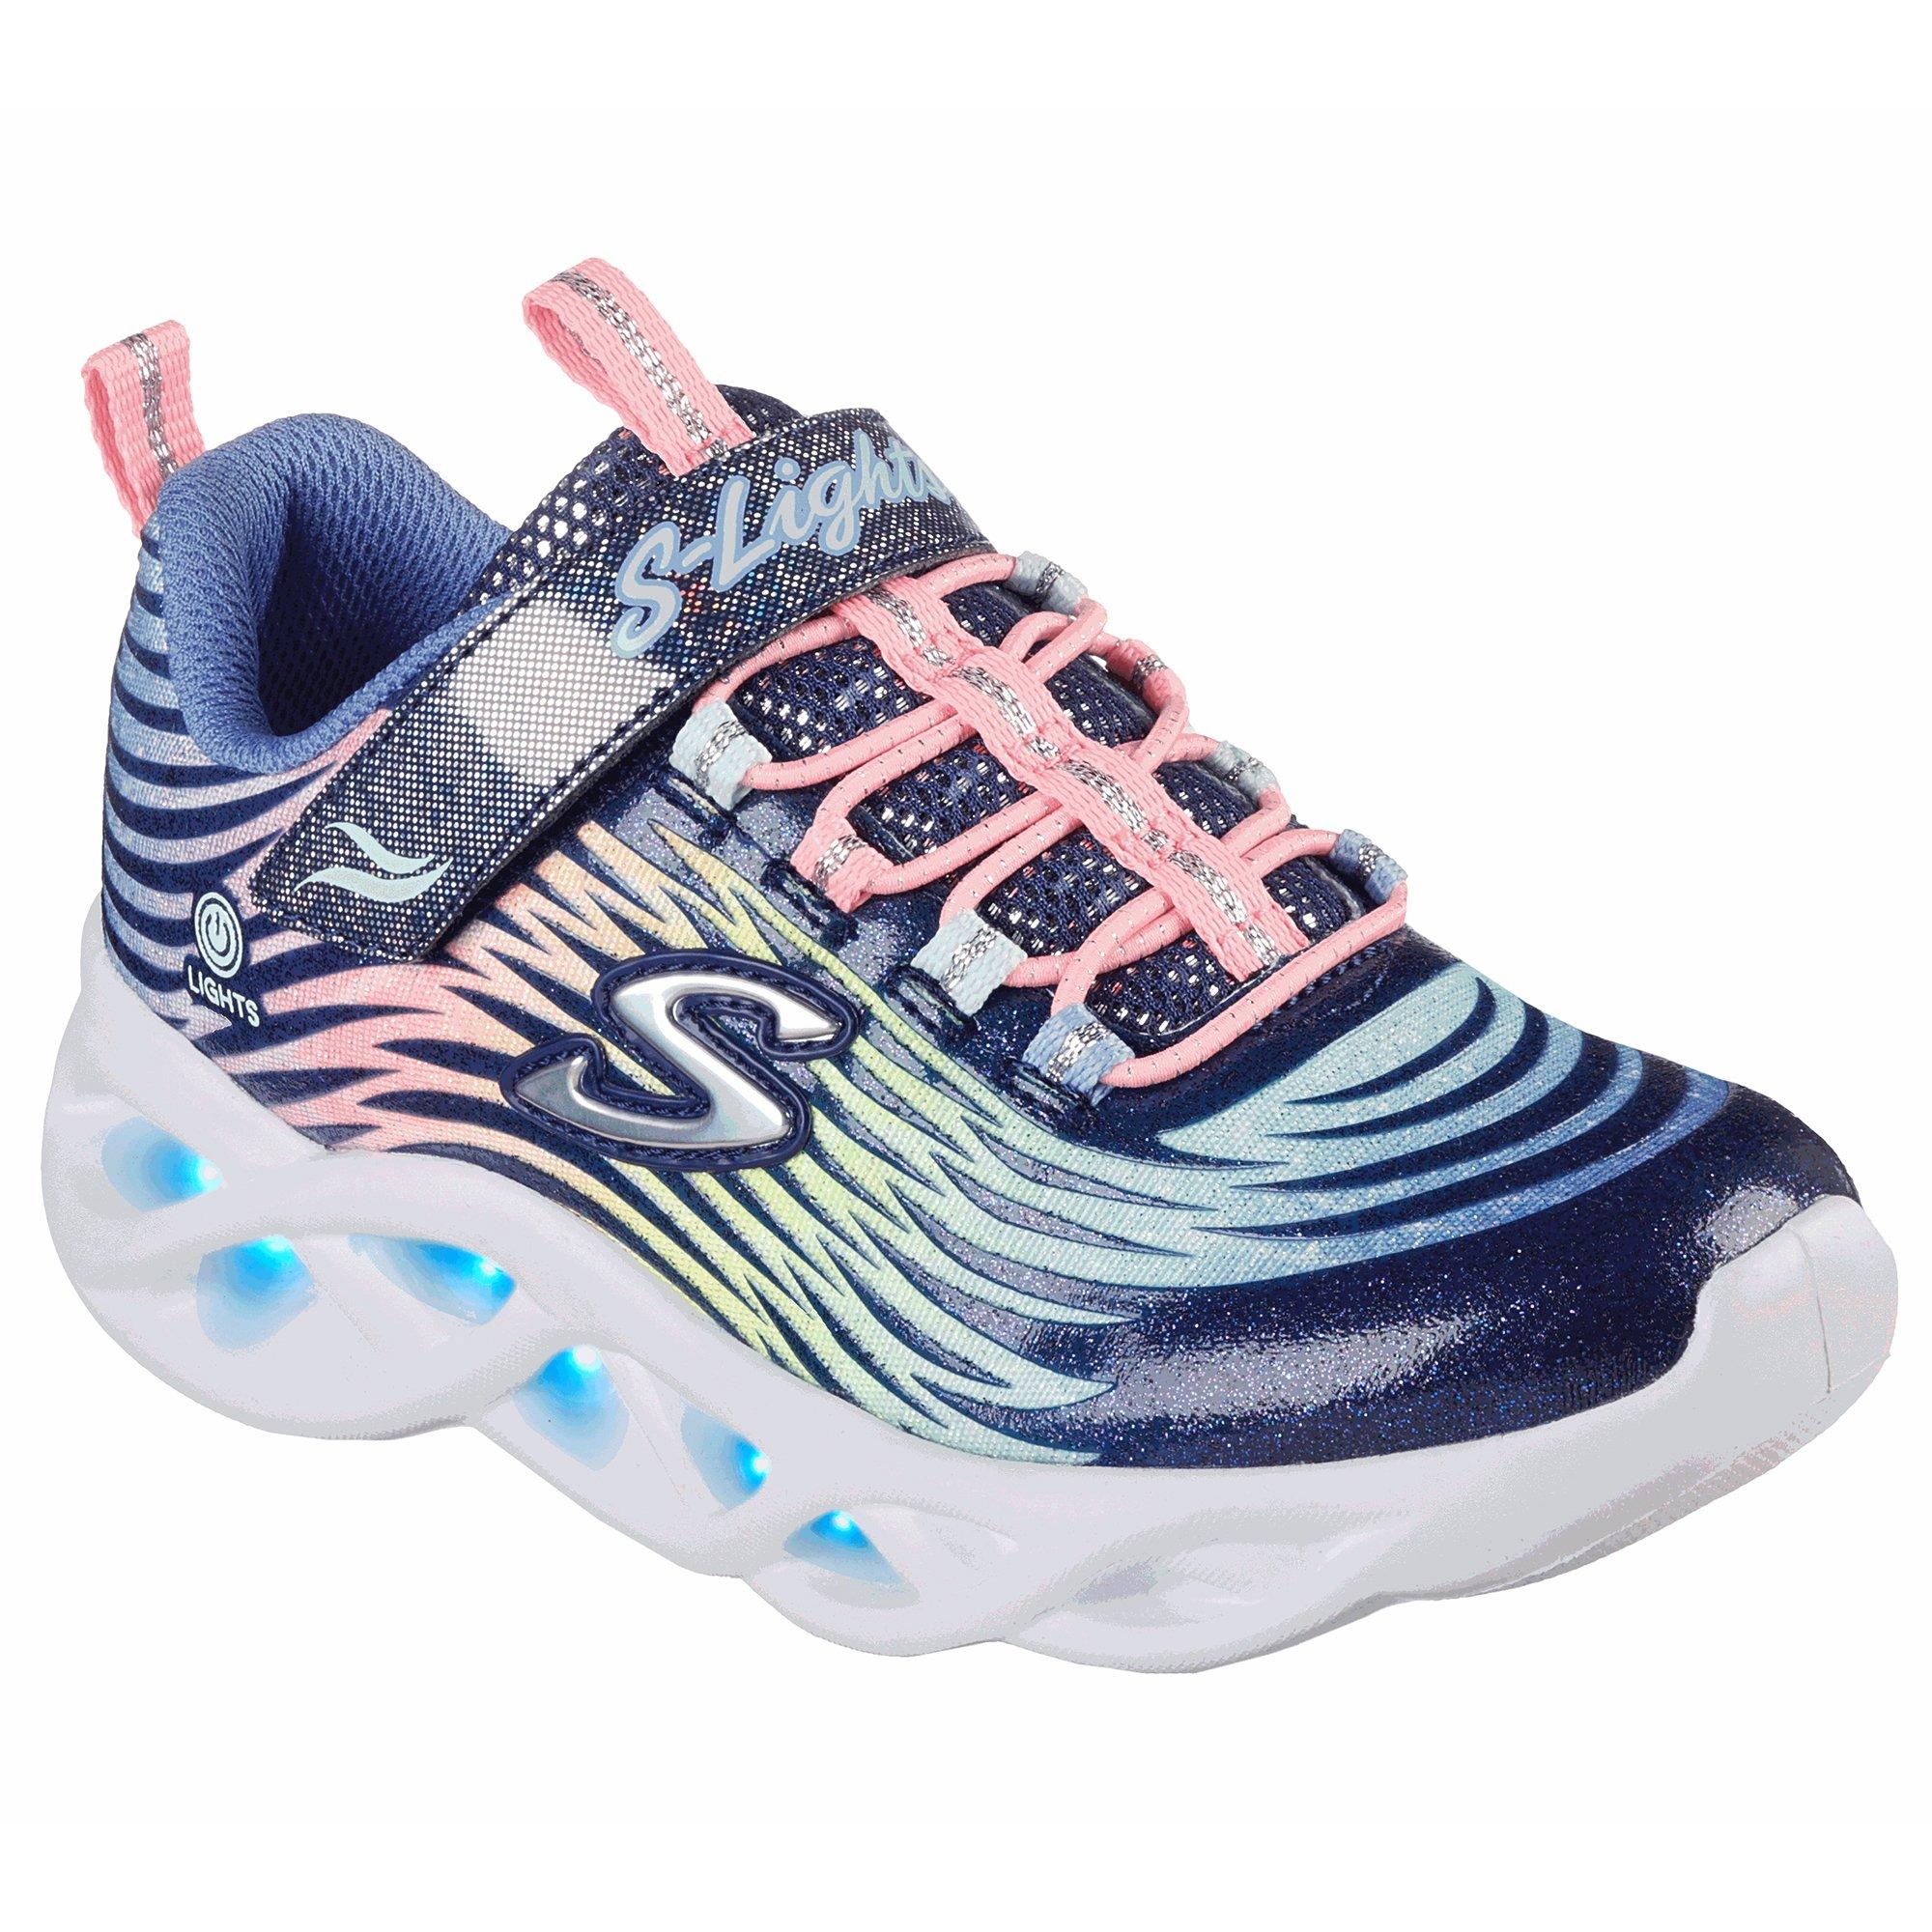 Skechers Girls Twisty Brights Mystical Bliss Athletic Shoes